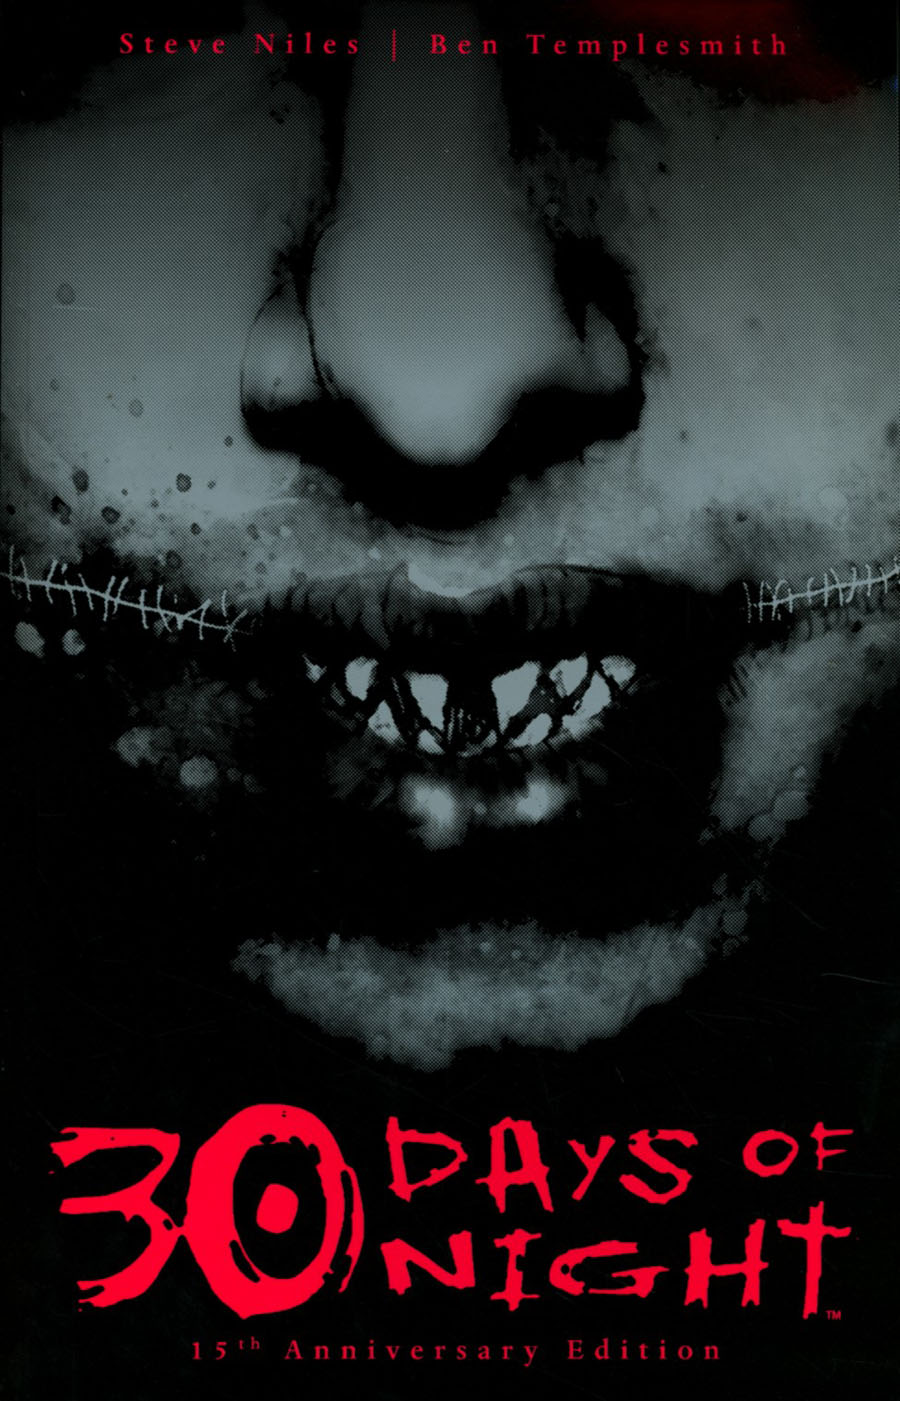 30 Days Of Night 15th Anniversary Edition TP Direct Market Exclusive